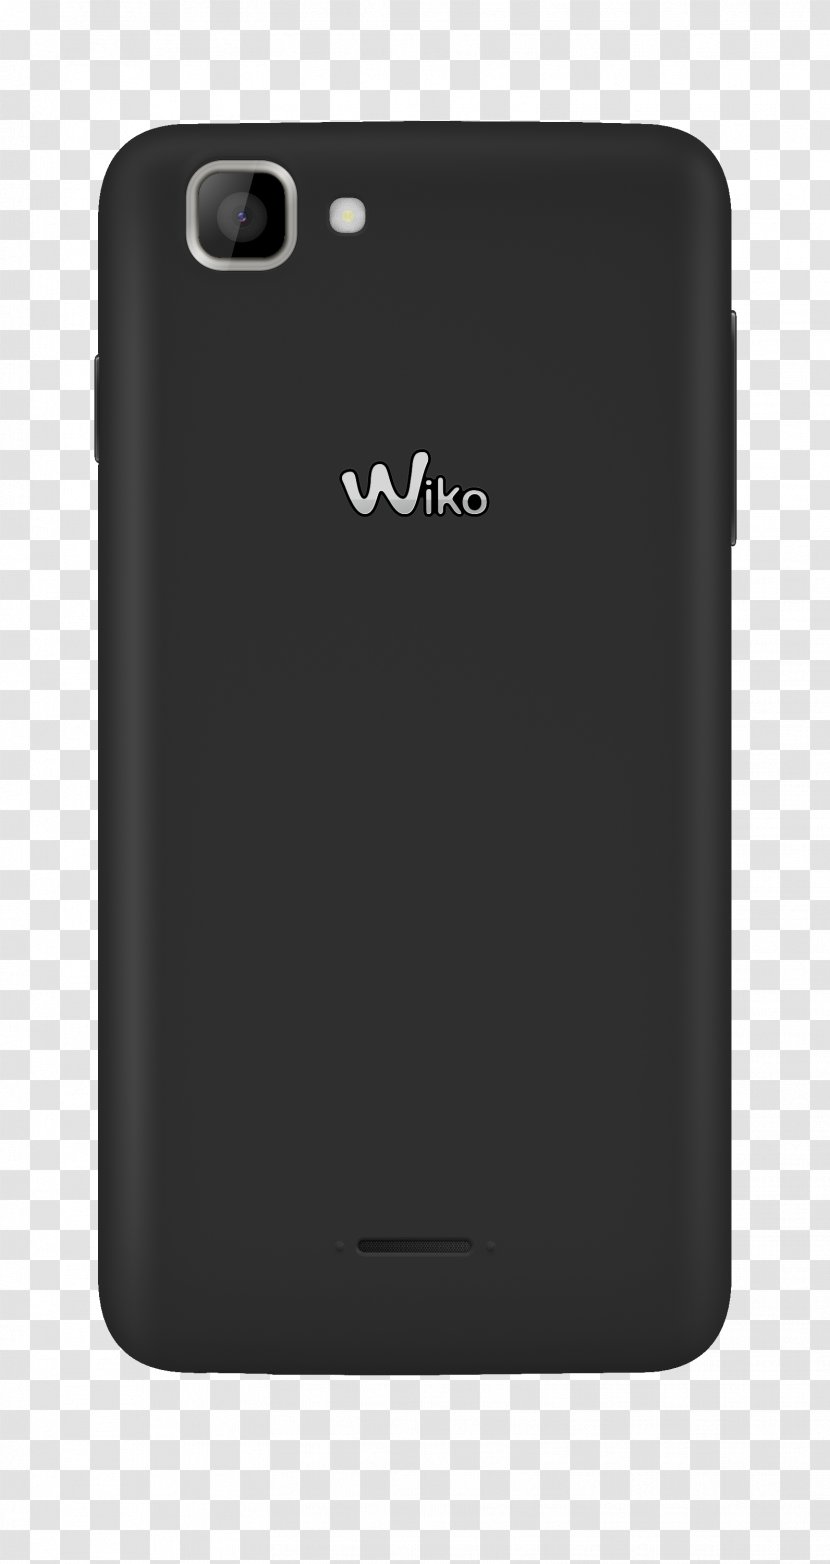 Feature Phone Smartphone Wiko KITE Mobile Accessories Transparent PNG